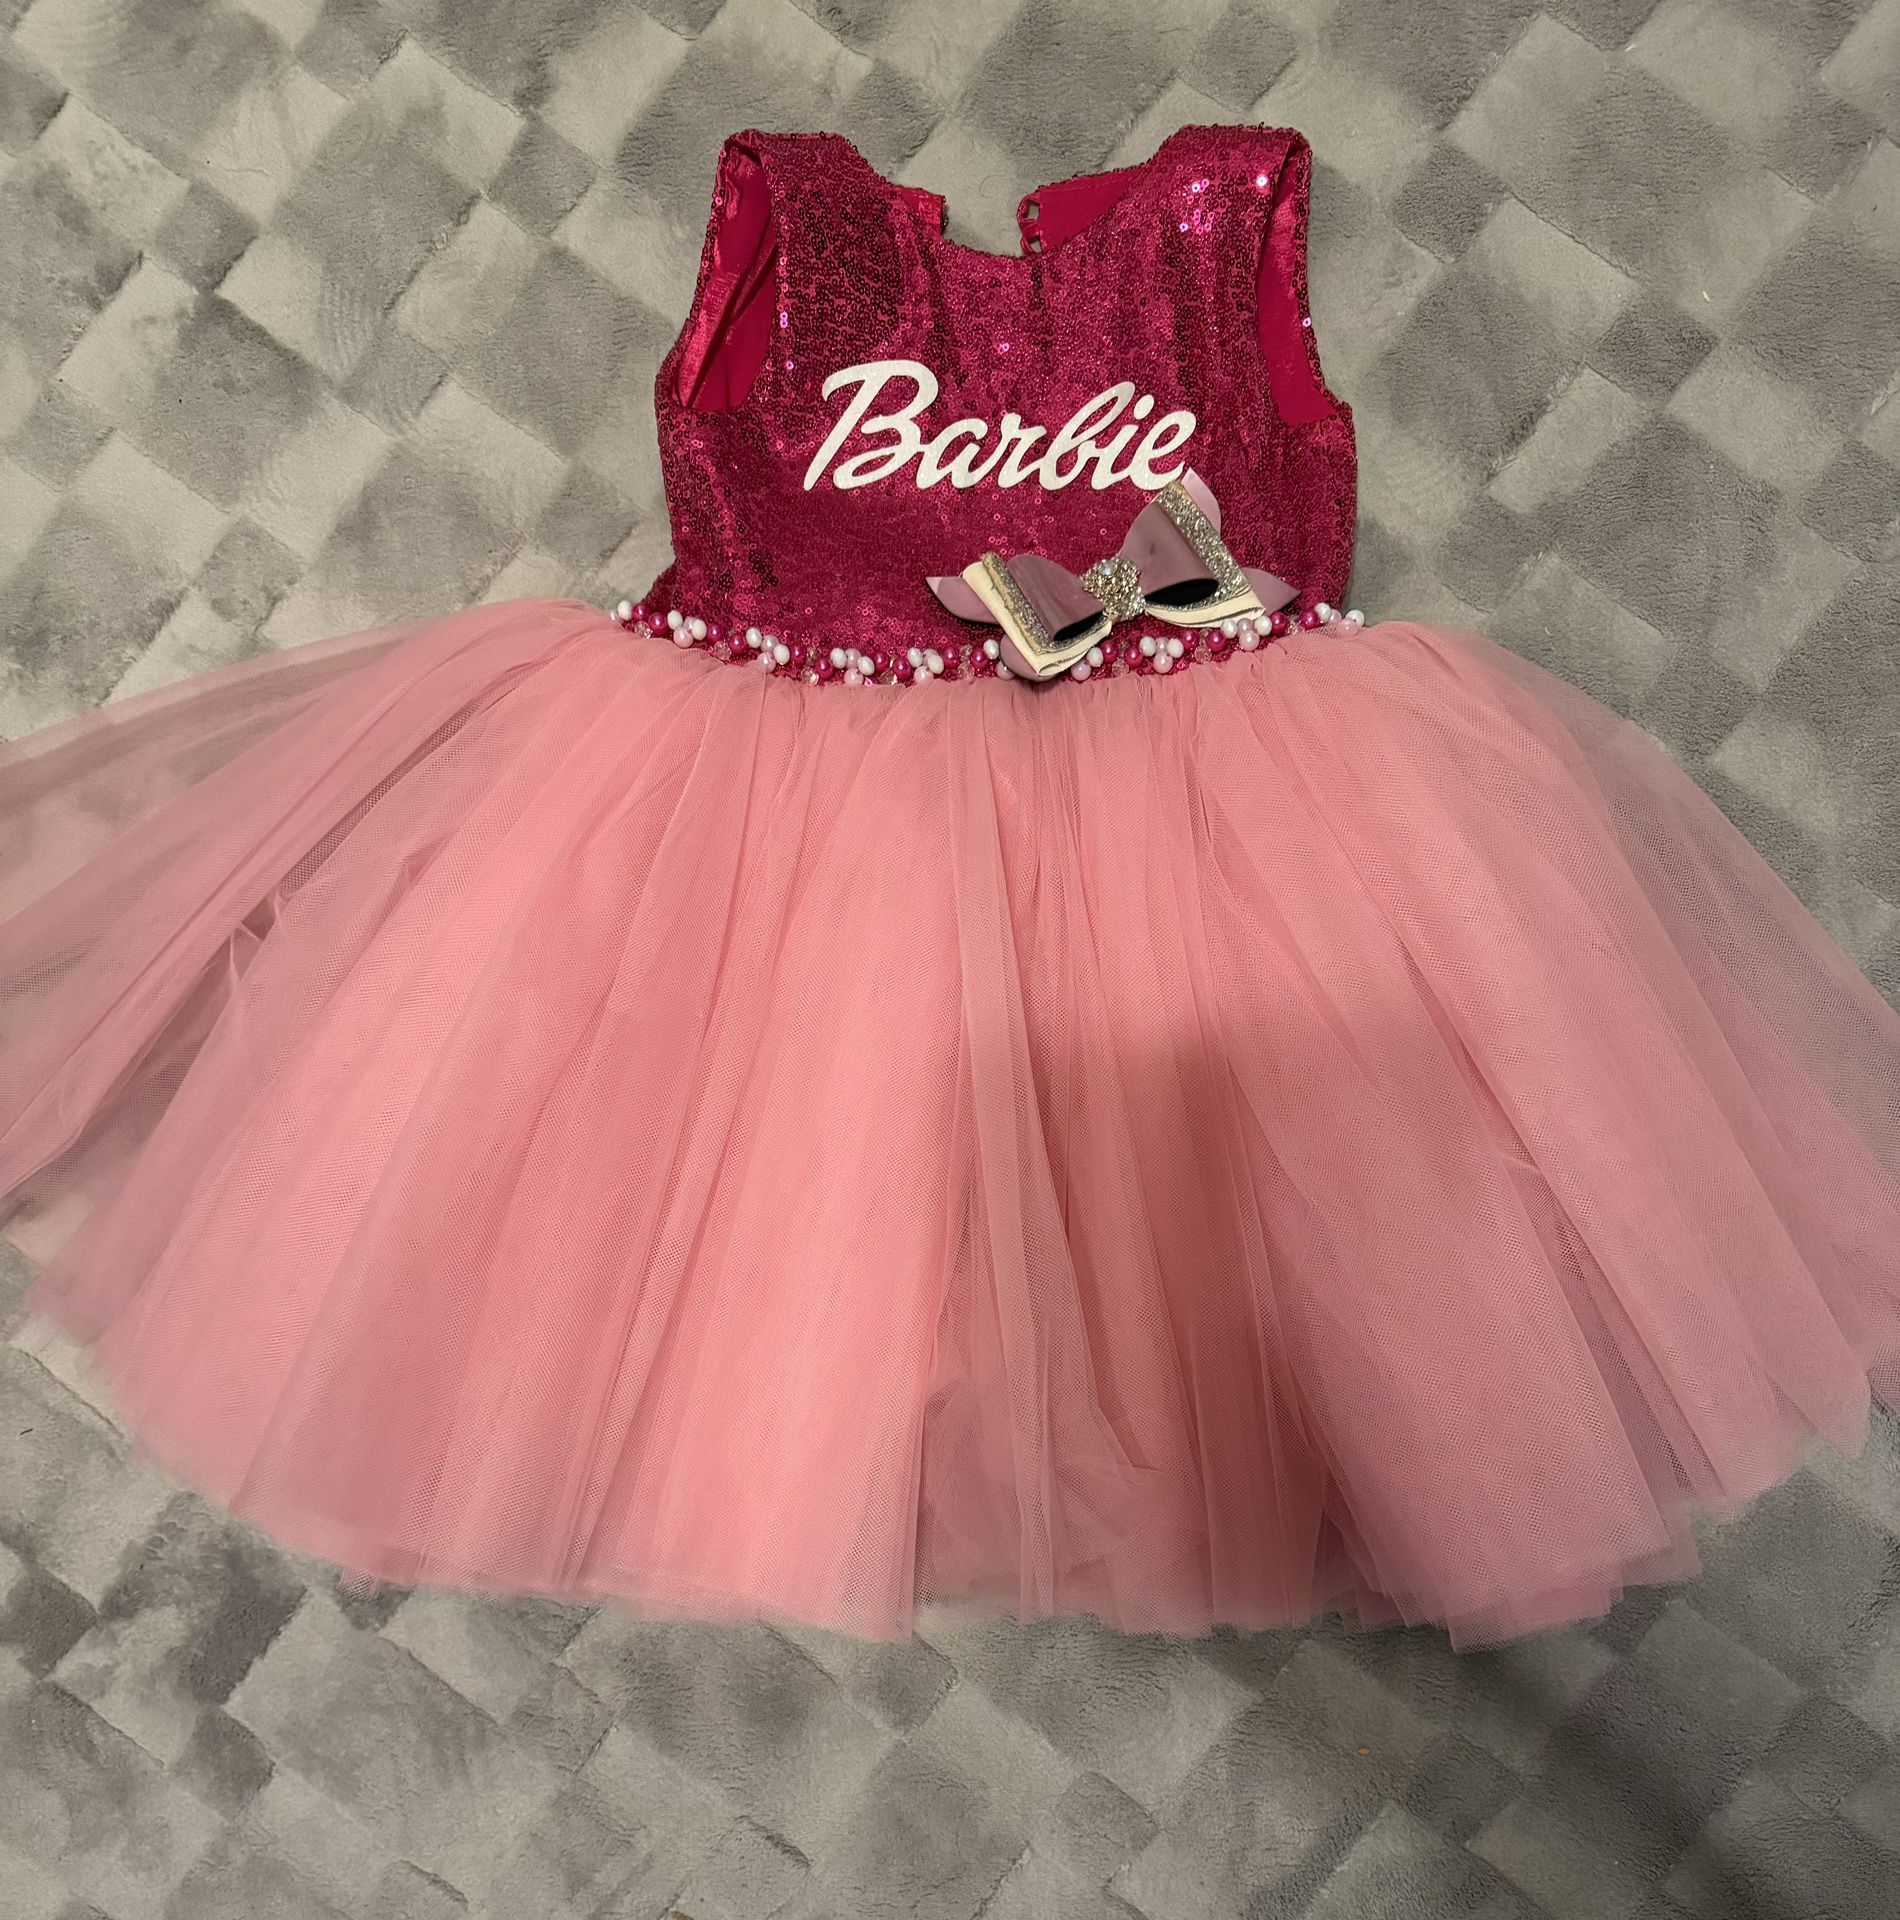 Barbie Dress For Party 